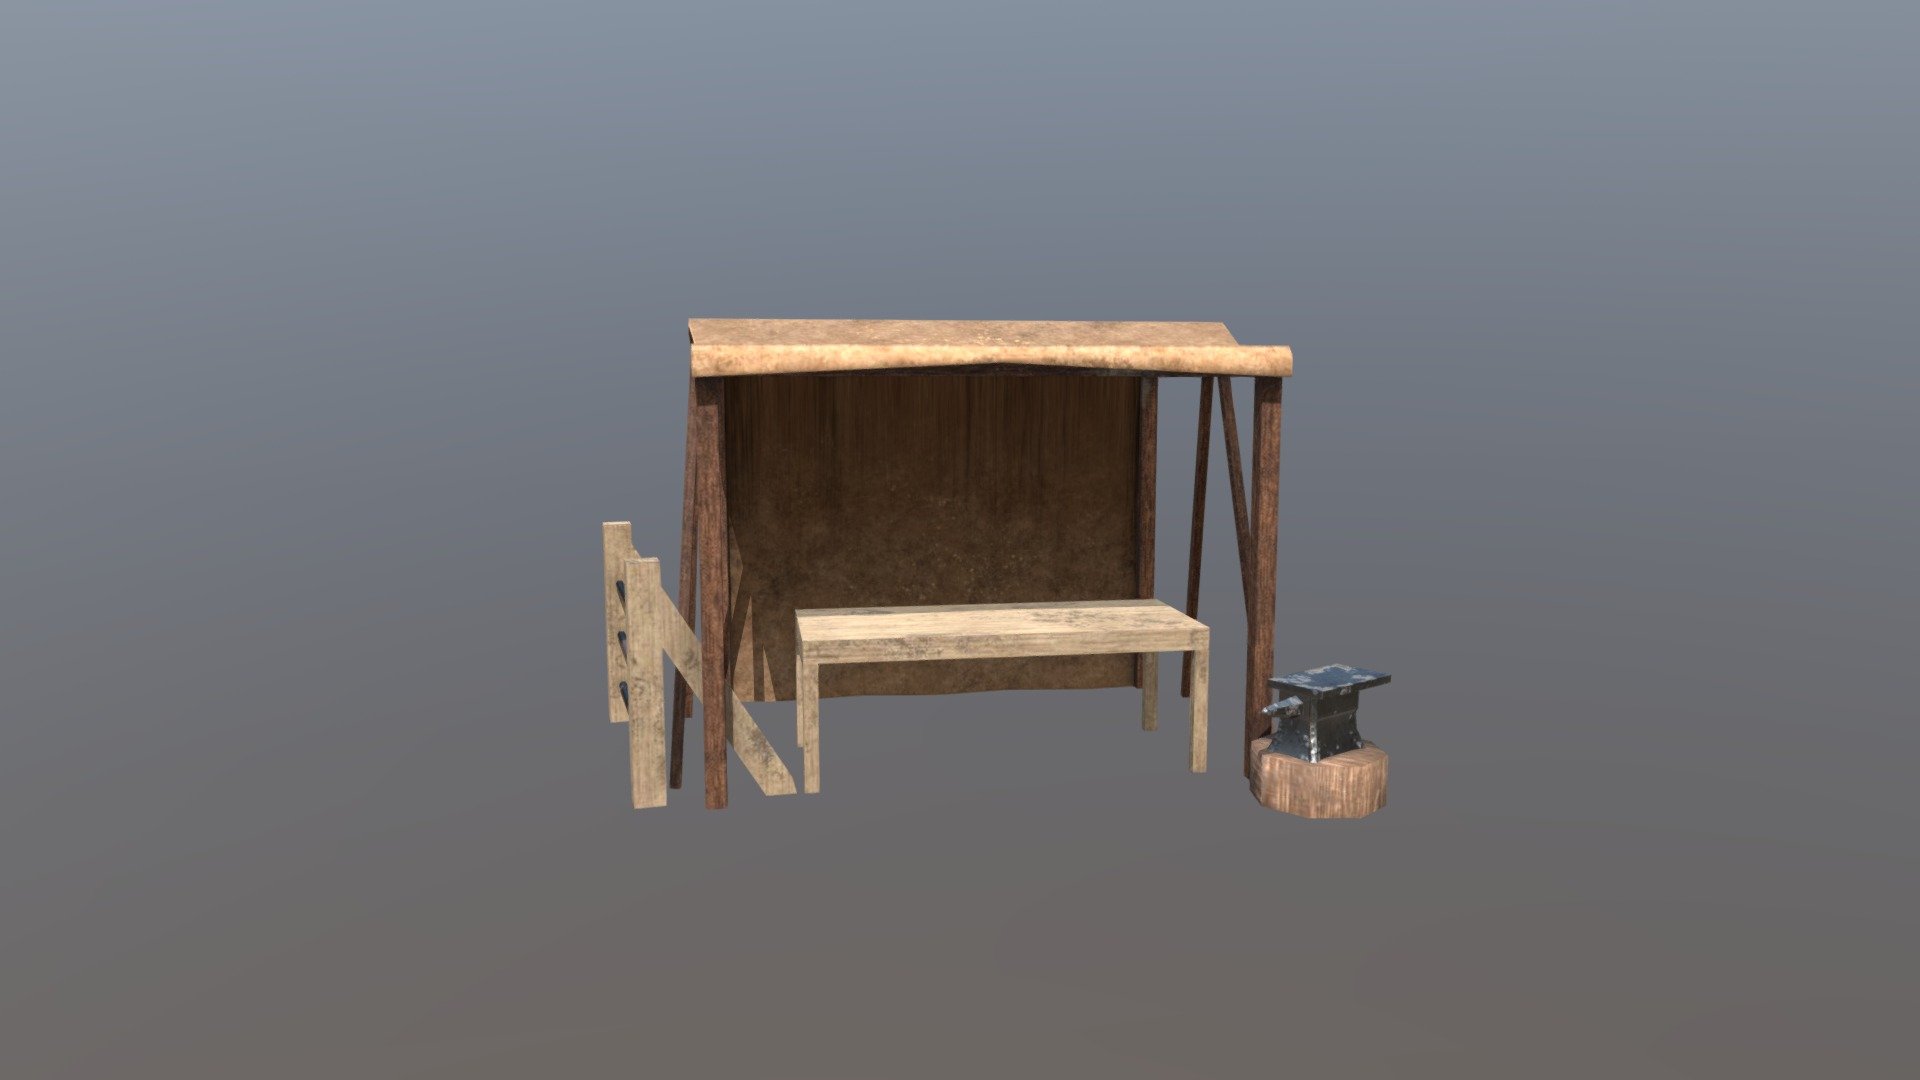 Weapon Stall